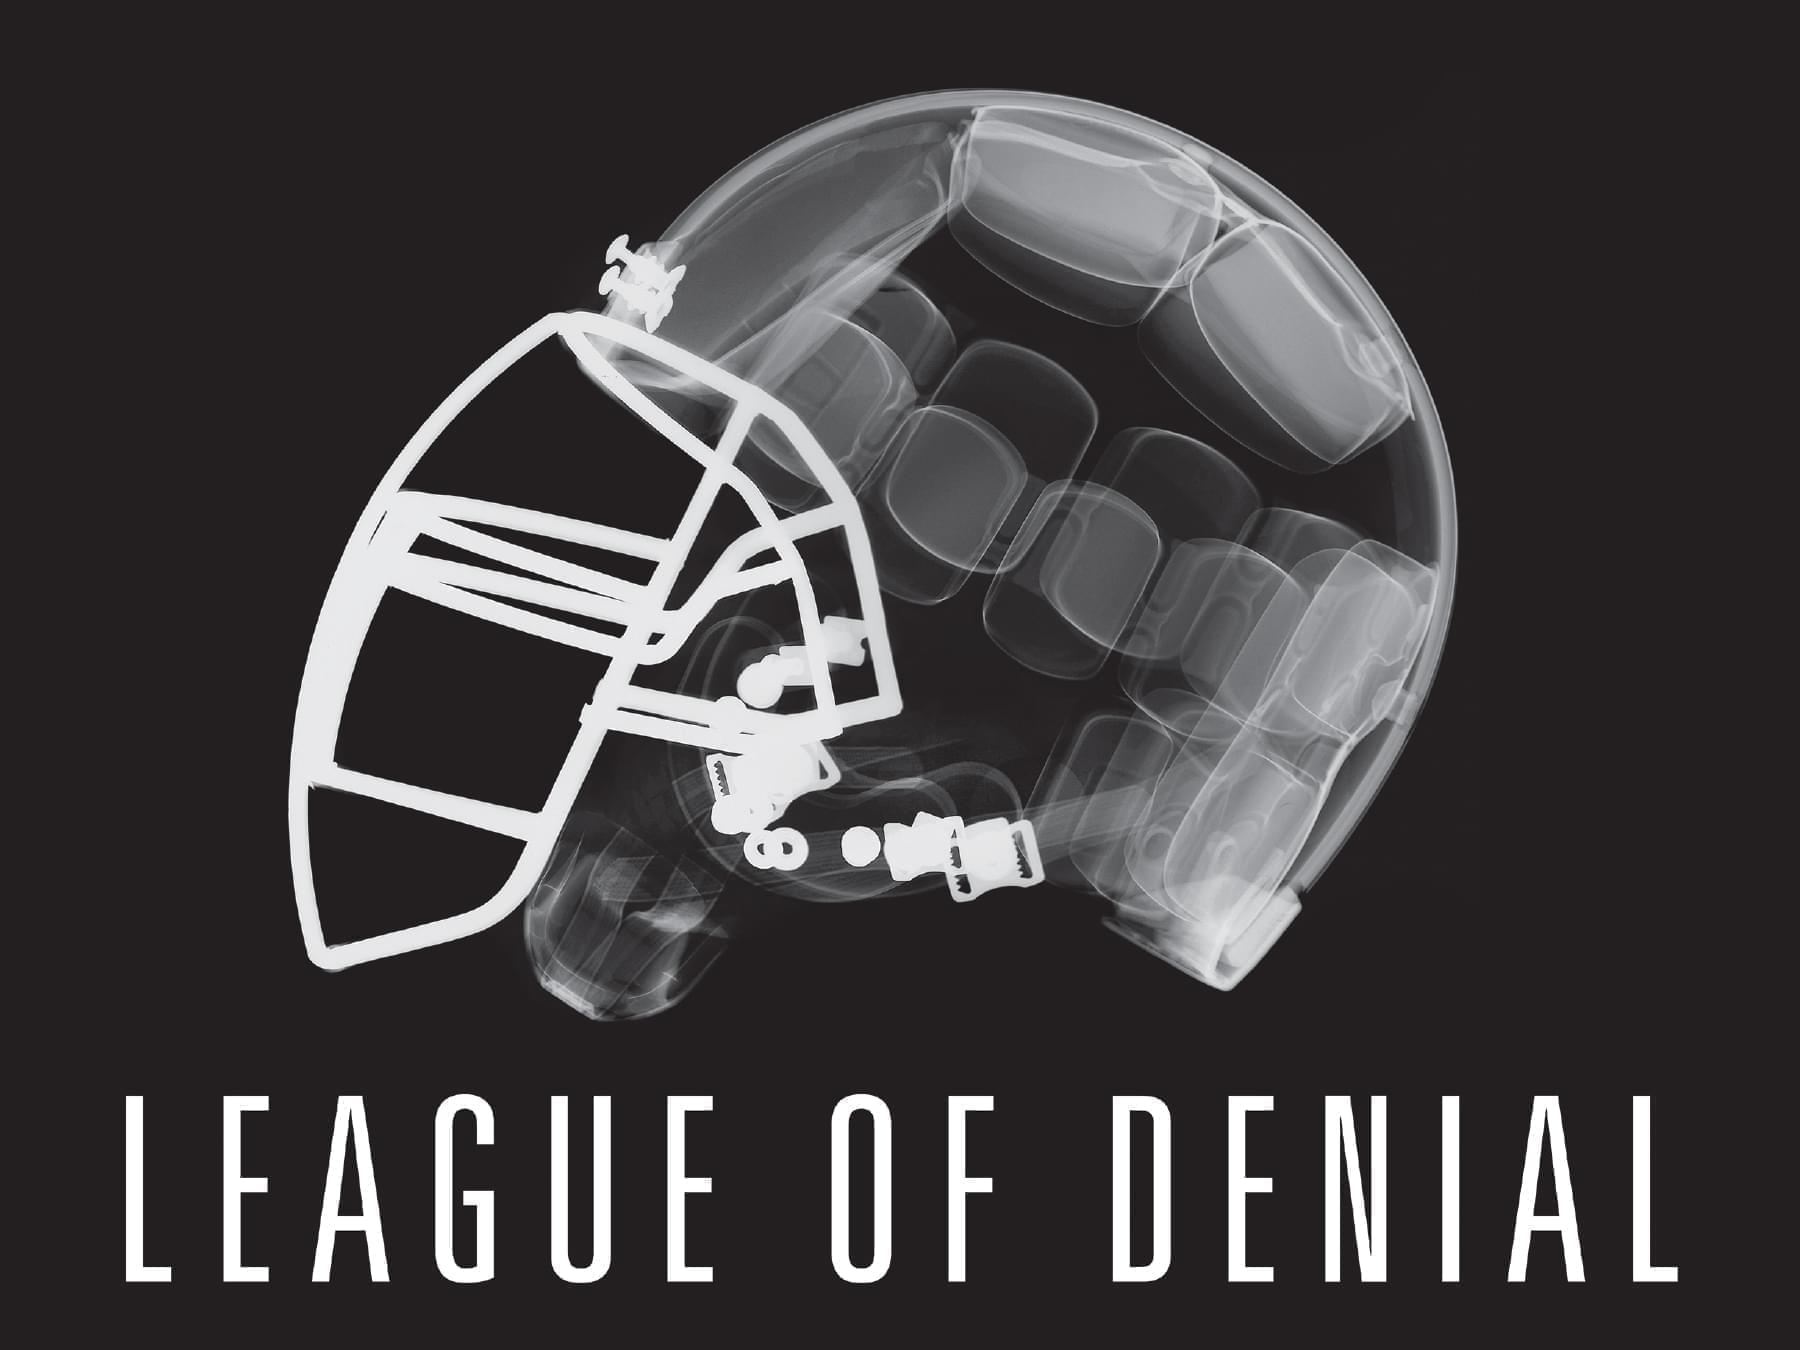 Image of a football helmet in x-ray for Frontline program: League of Denial